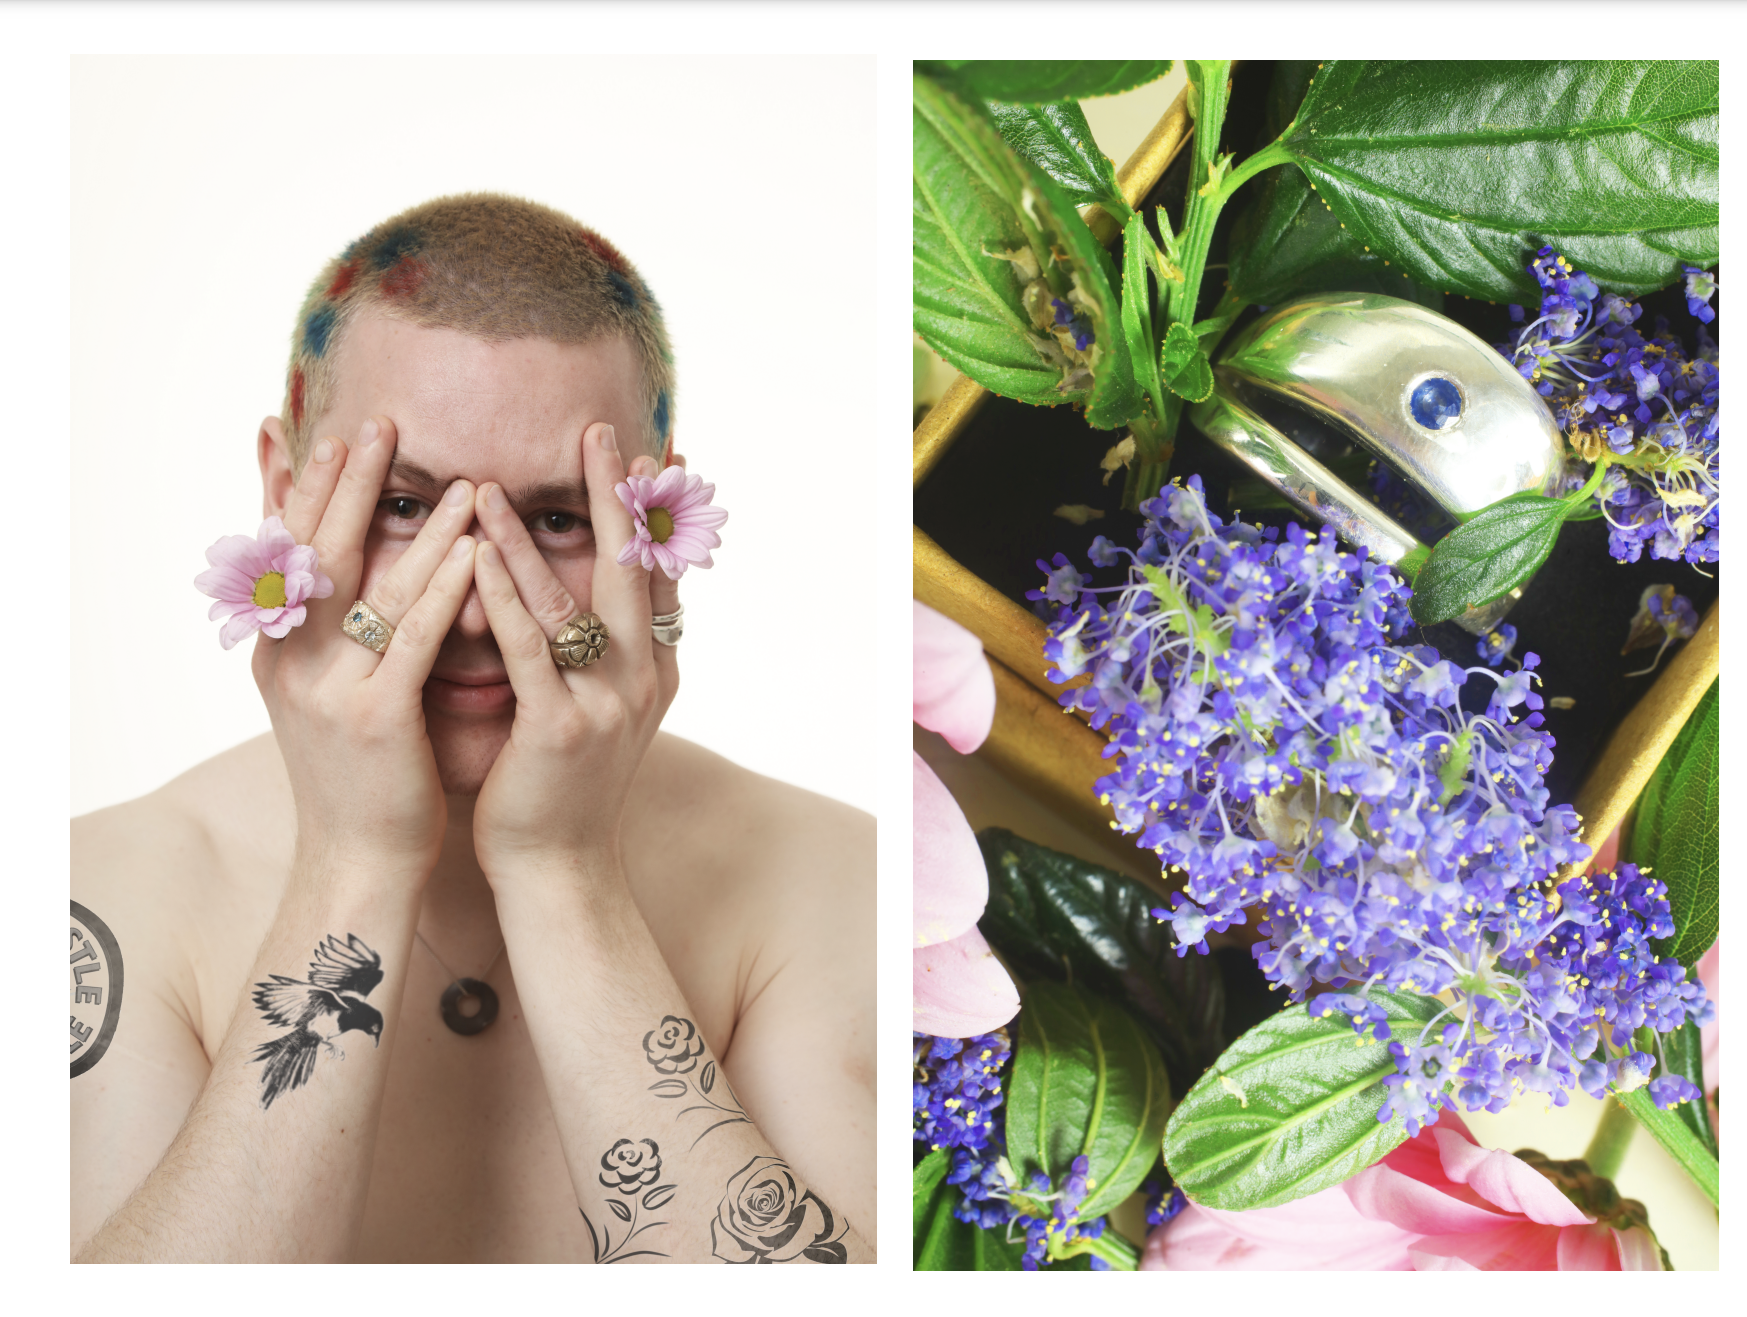 Two images, on the left, an image of Eliot, topless with tattoos. He is holding his hands against his face and looking through the gaps between his fingers. On each hand he is wearing one gold ring and one large pink flower. On the right, a gold ring with a blue gemstone is sat amidst purple flowers and green leaves. 